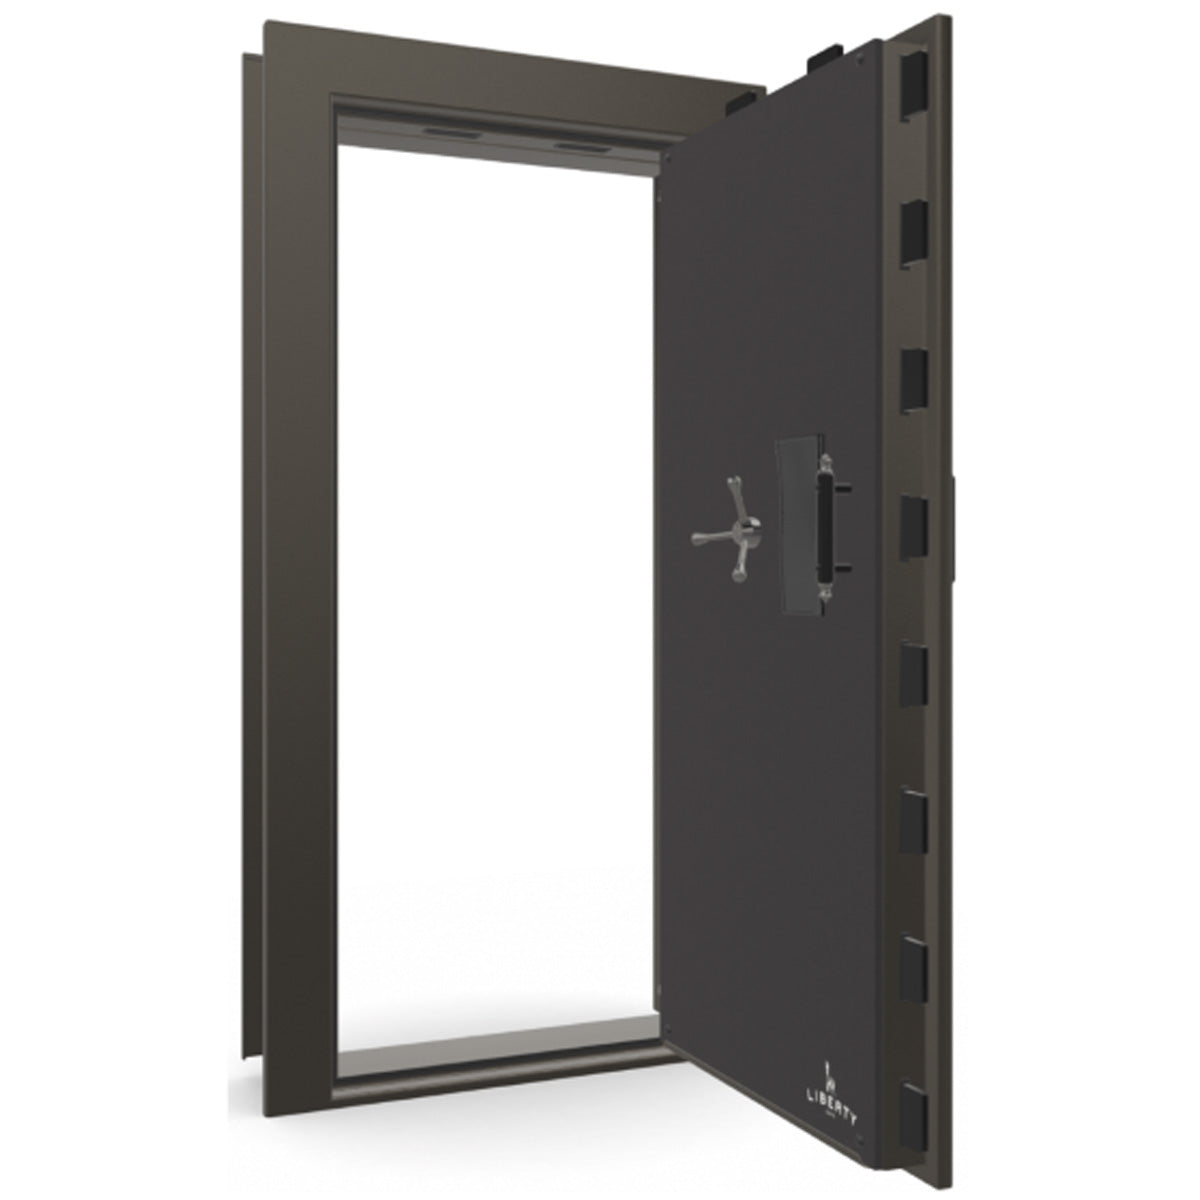 The Beast Vault Door in Gray Marble with Black Chrome Electronic Lock, Right Outswing, door open.